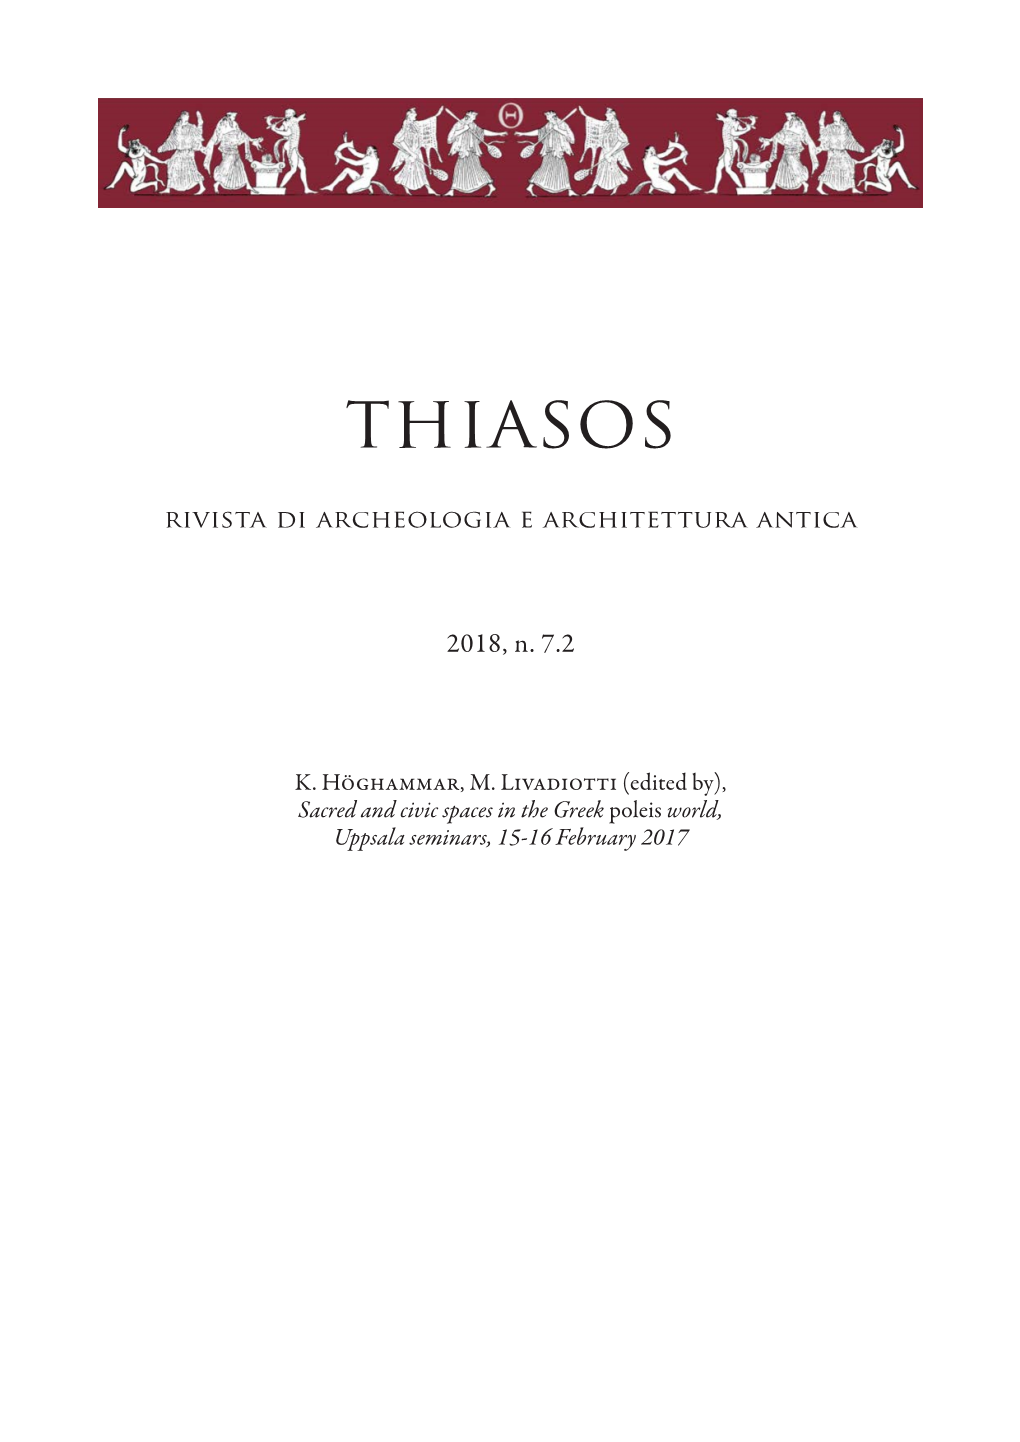 The Infrastructure of a Hellenistic Town and Its Persistence in Imperial Period: the Case of Kos